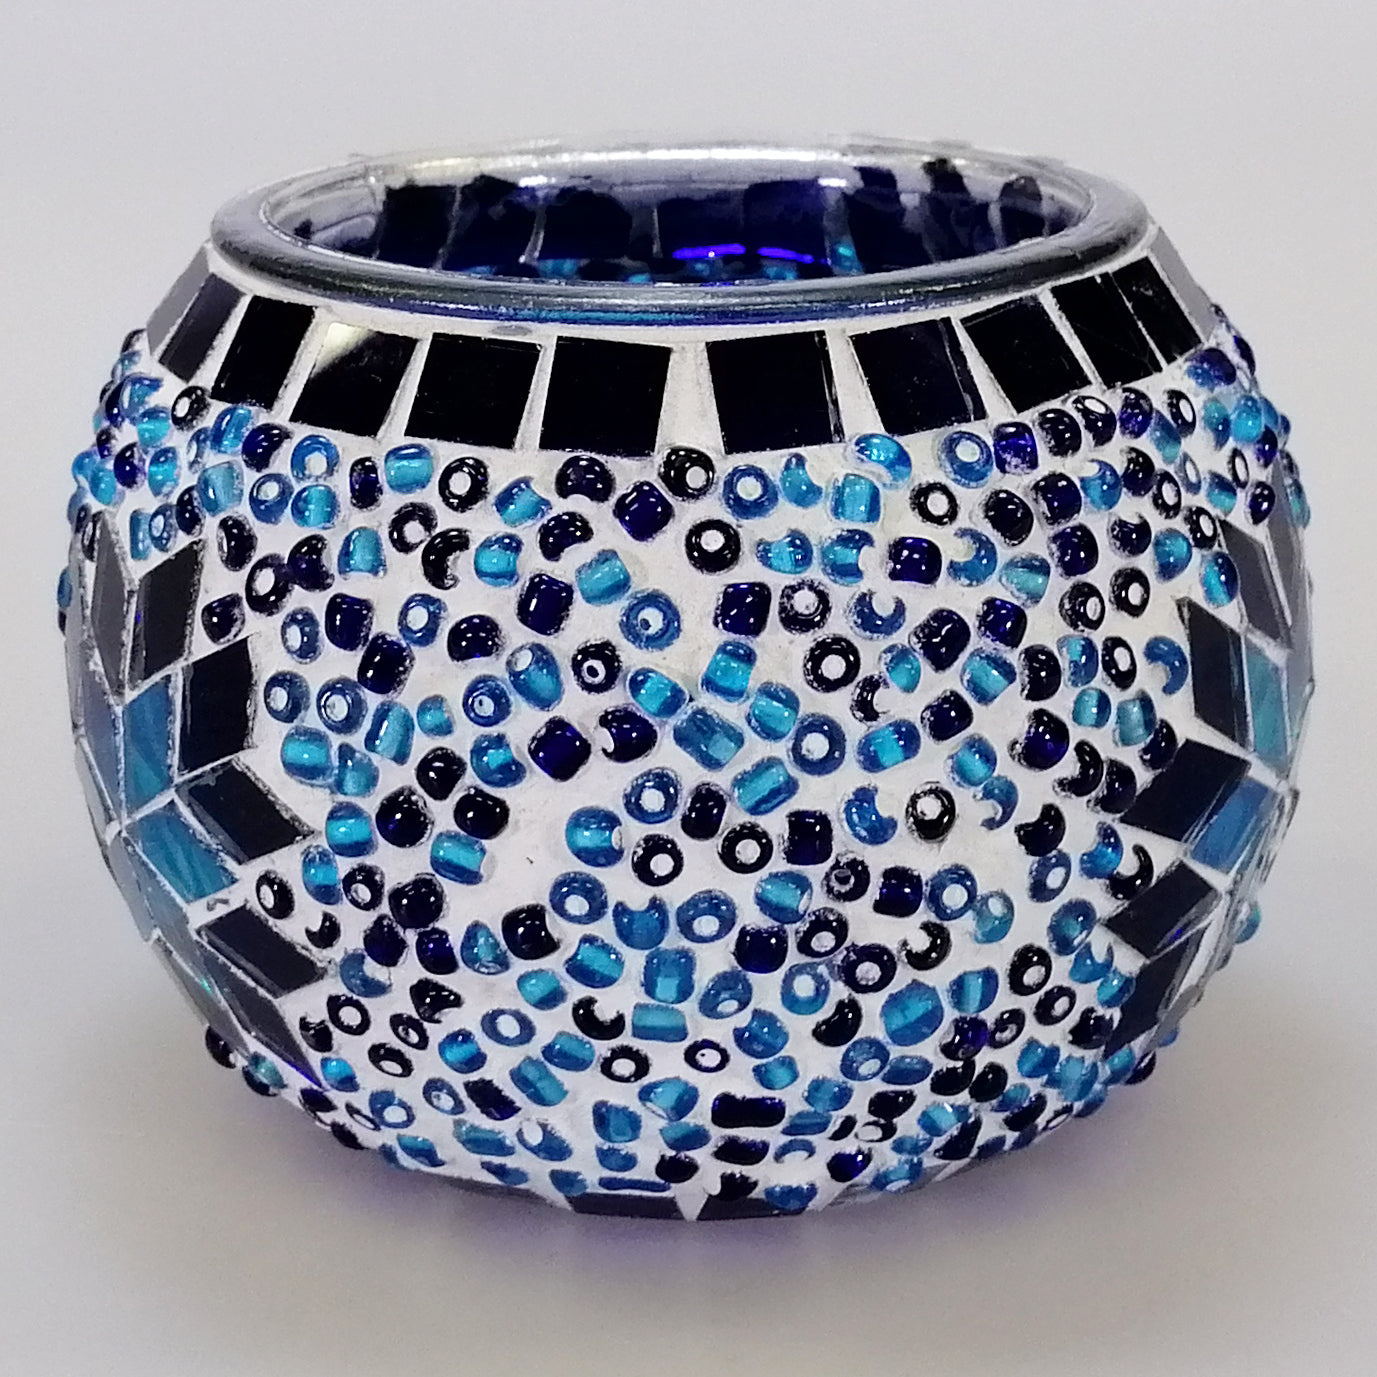 Glass Mosaic Candle Holder - Blue